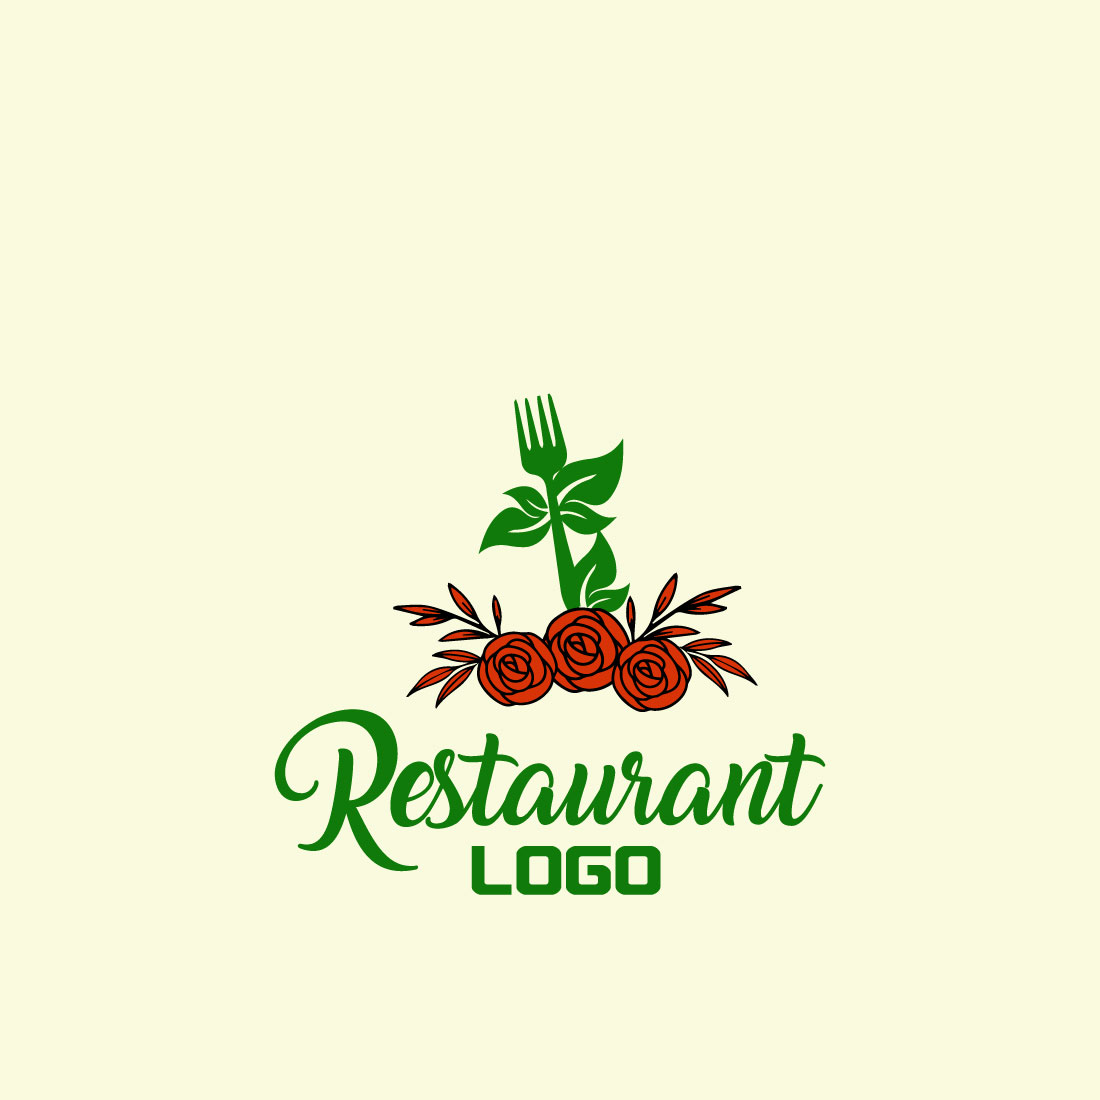 Free cooking logo ideas cover image.